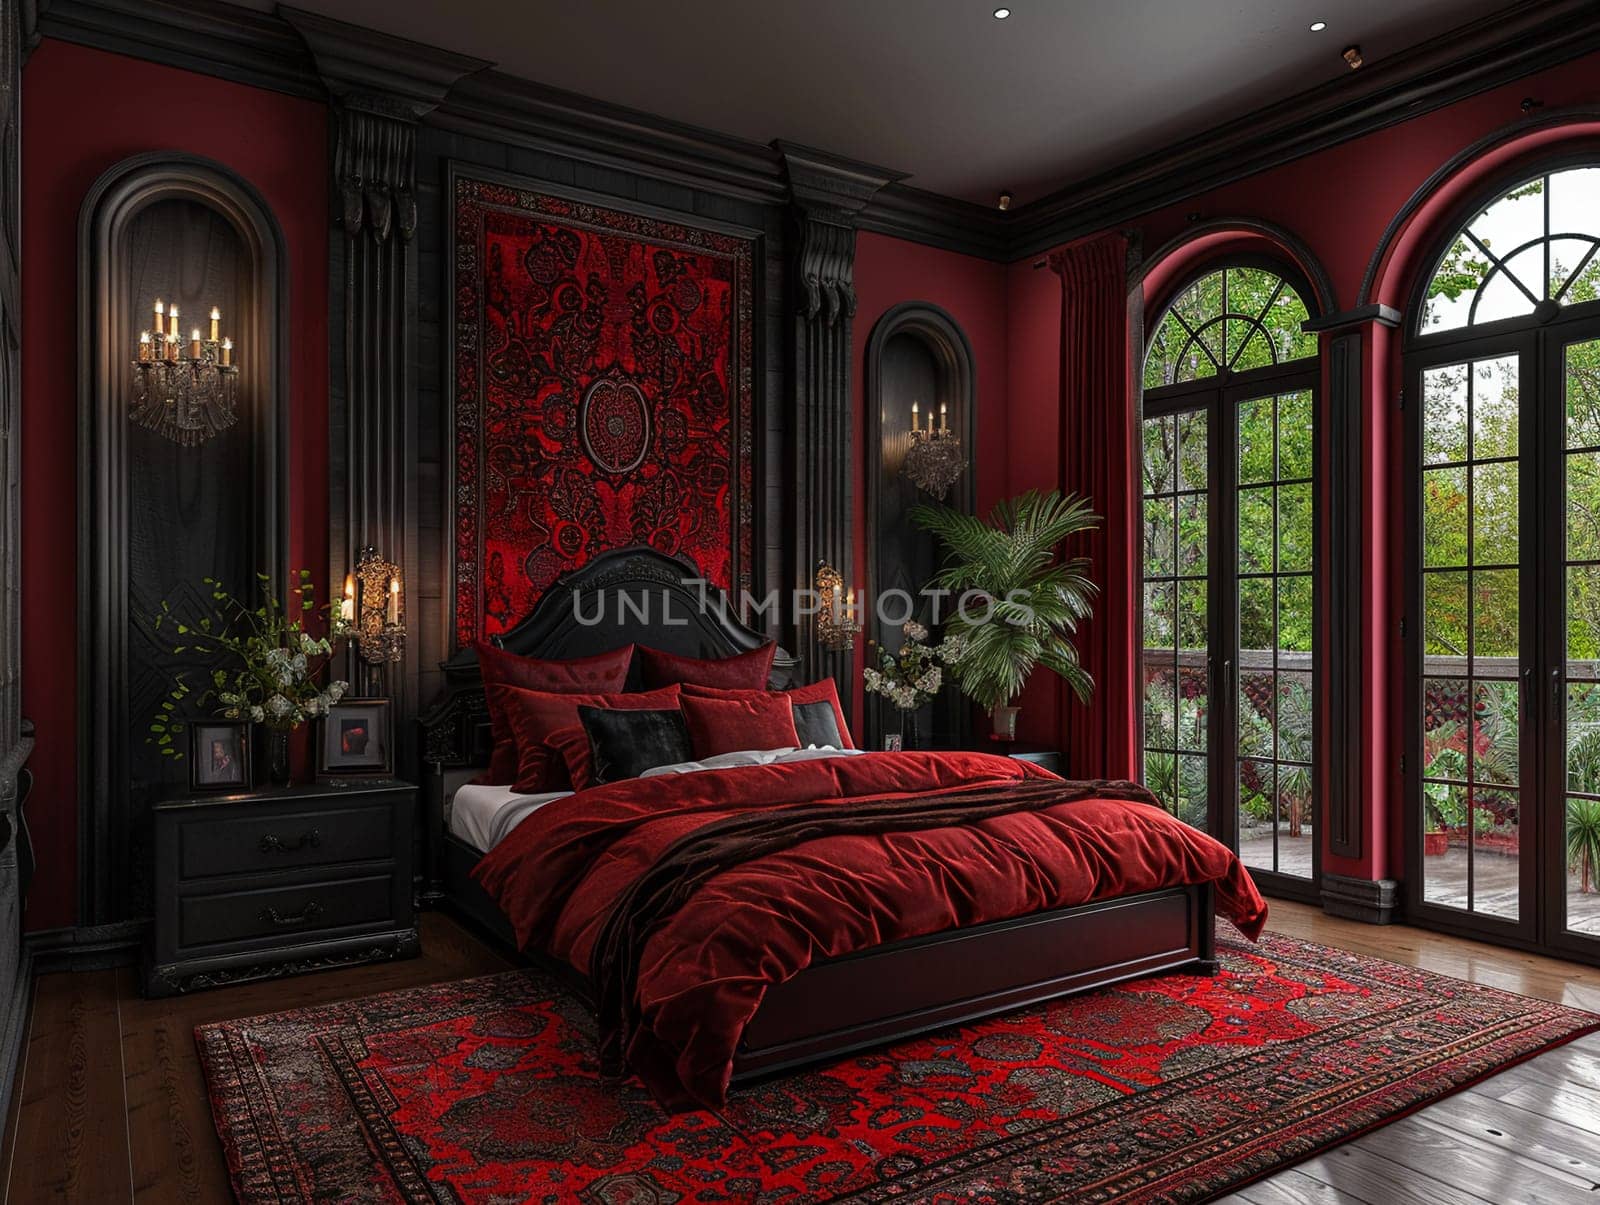 Modern Gothic bedroom with dark colors and dramatic decor